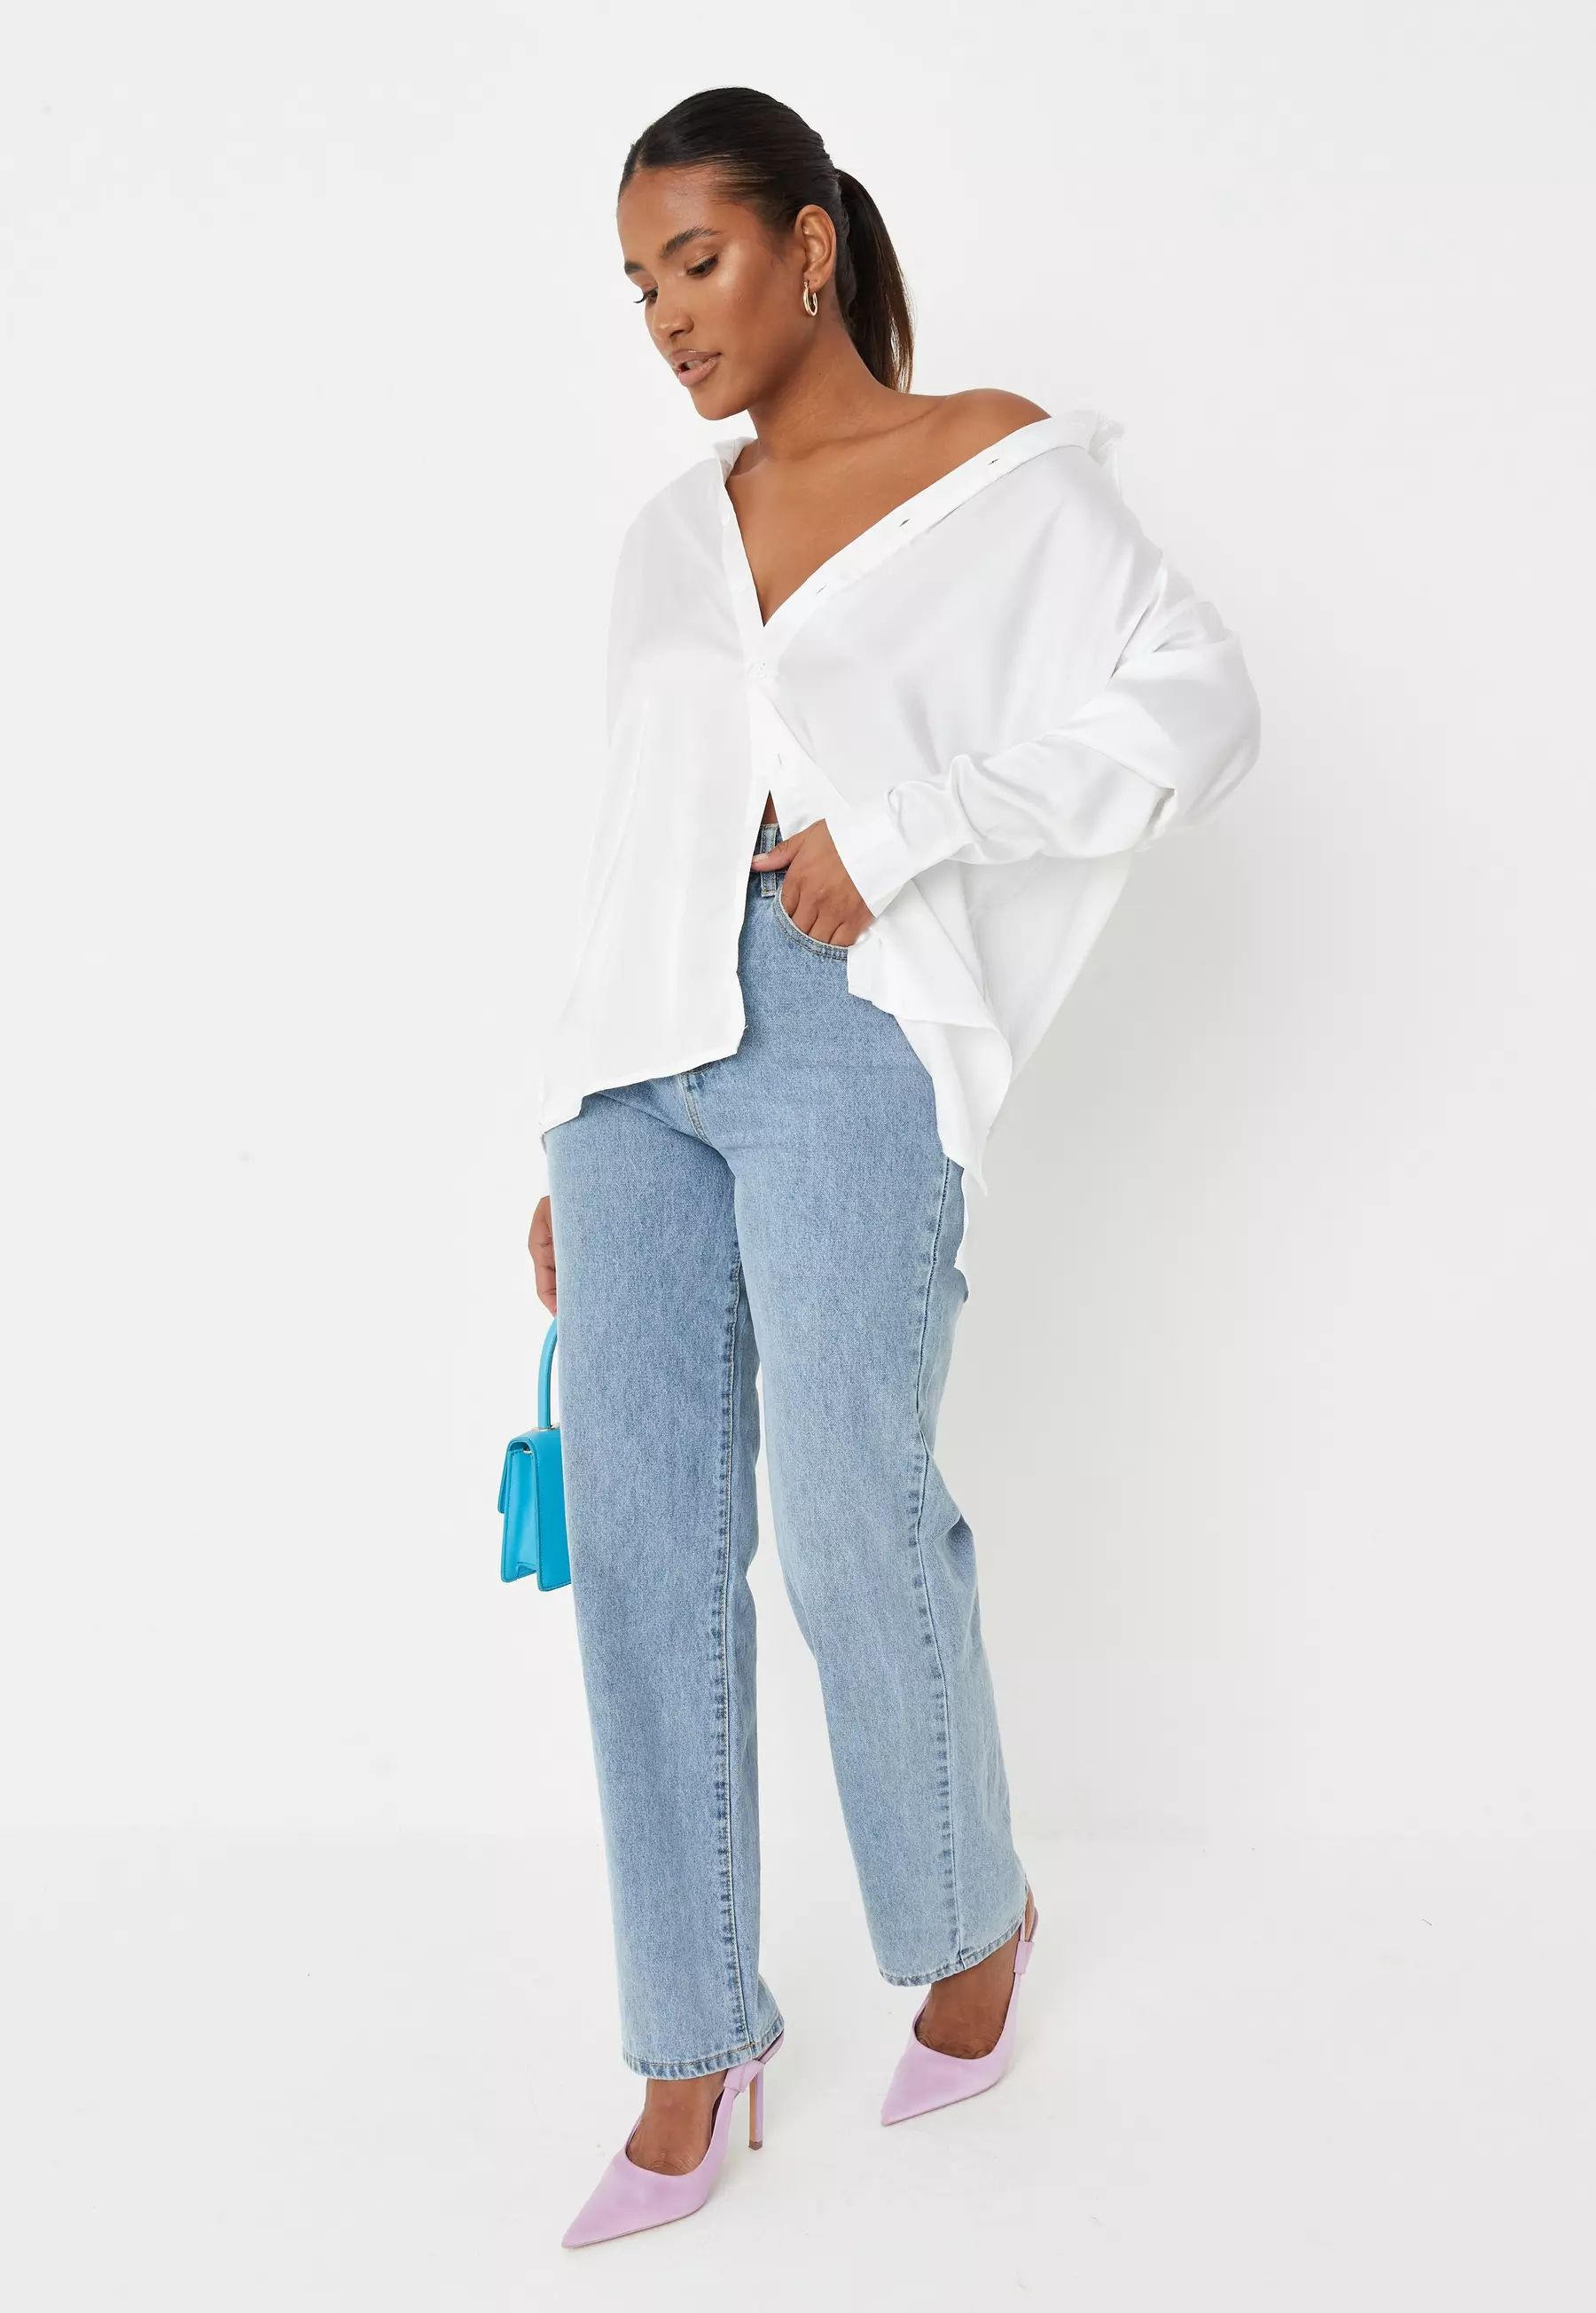 Missguided - White Satin Extreme Oversized Shirt | Missguided (US & CA)